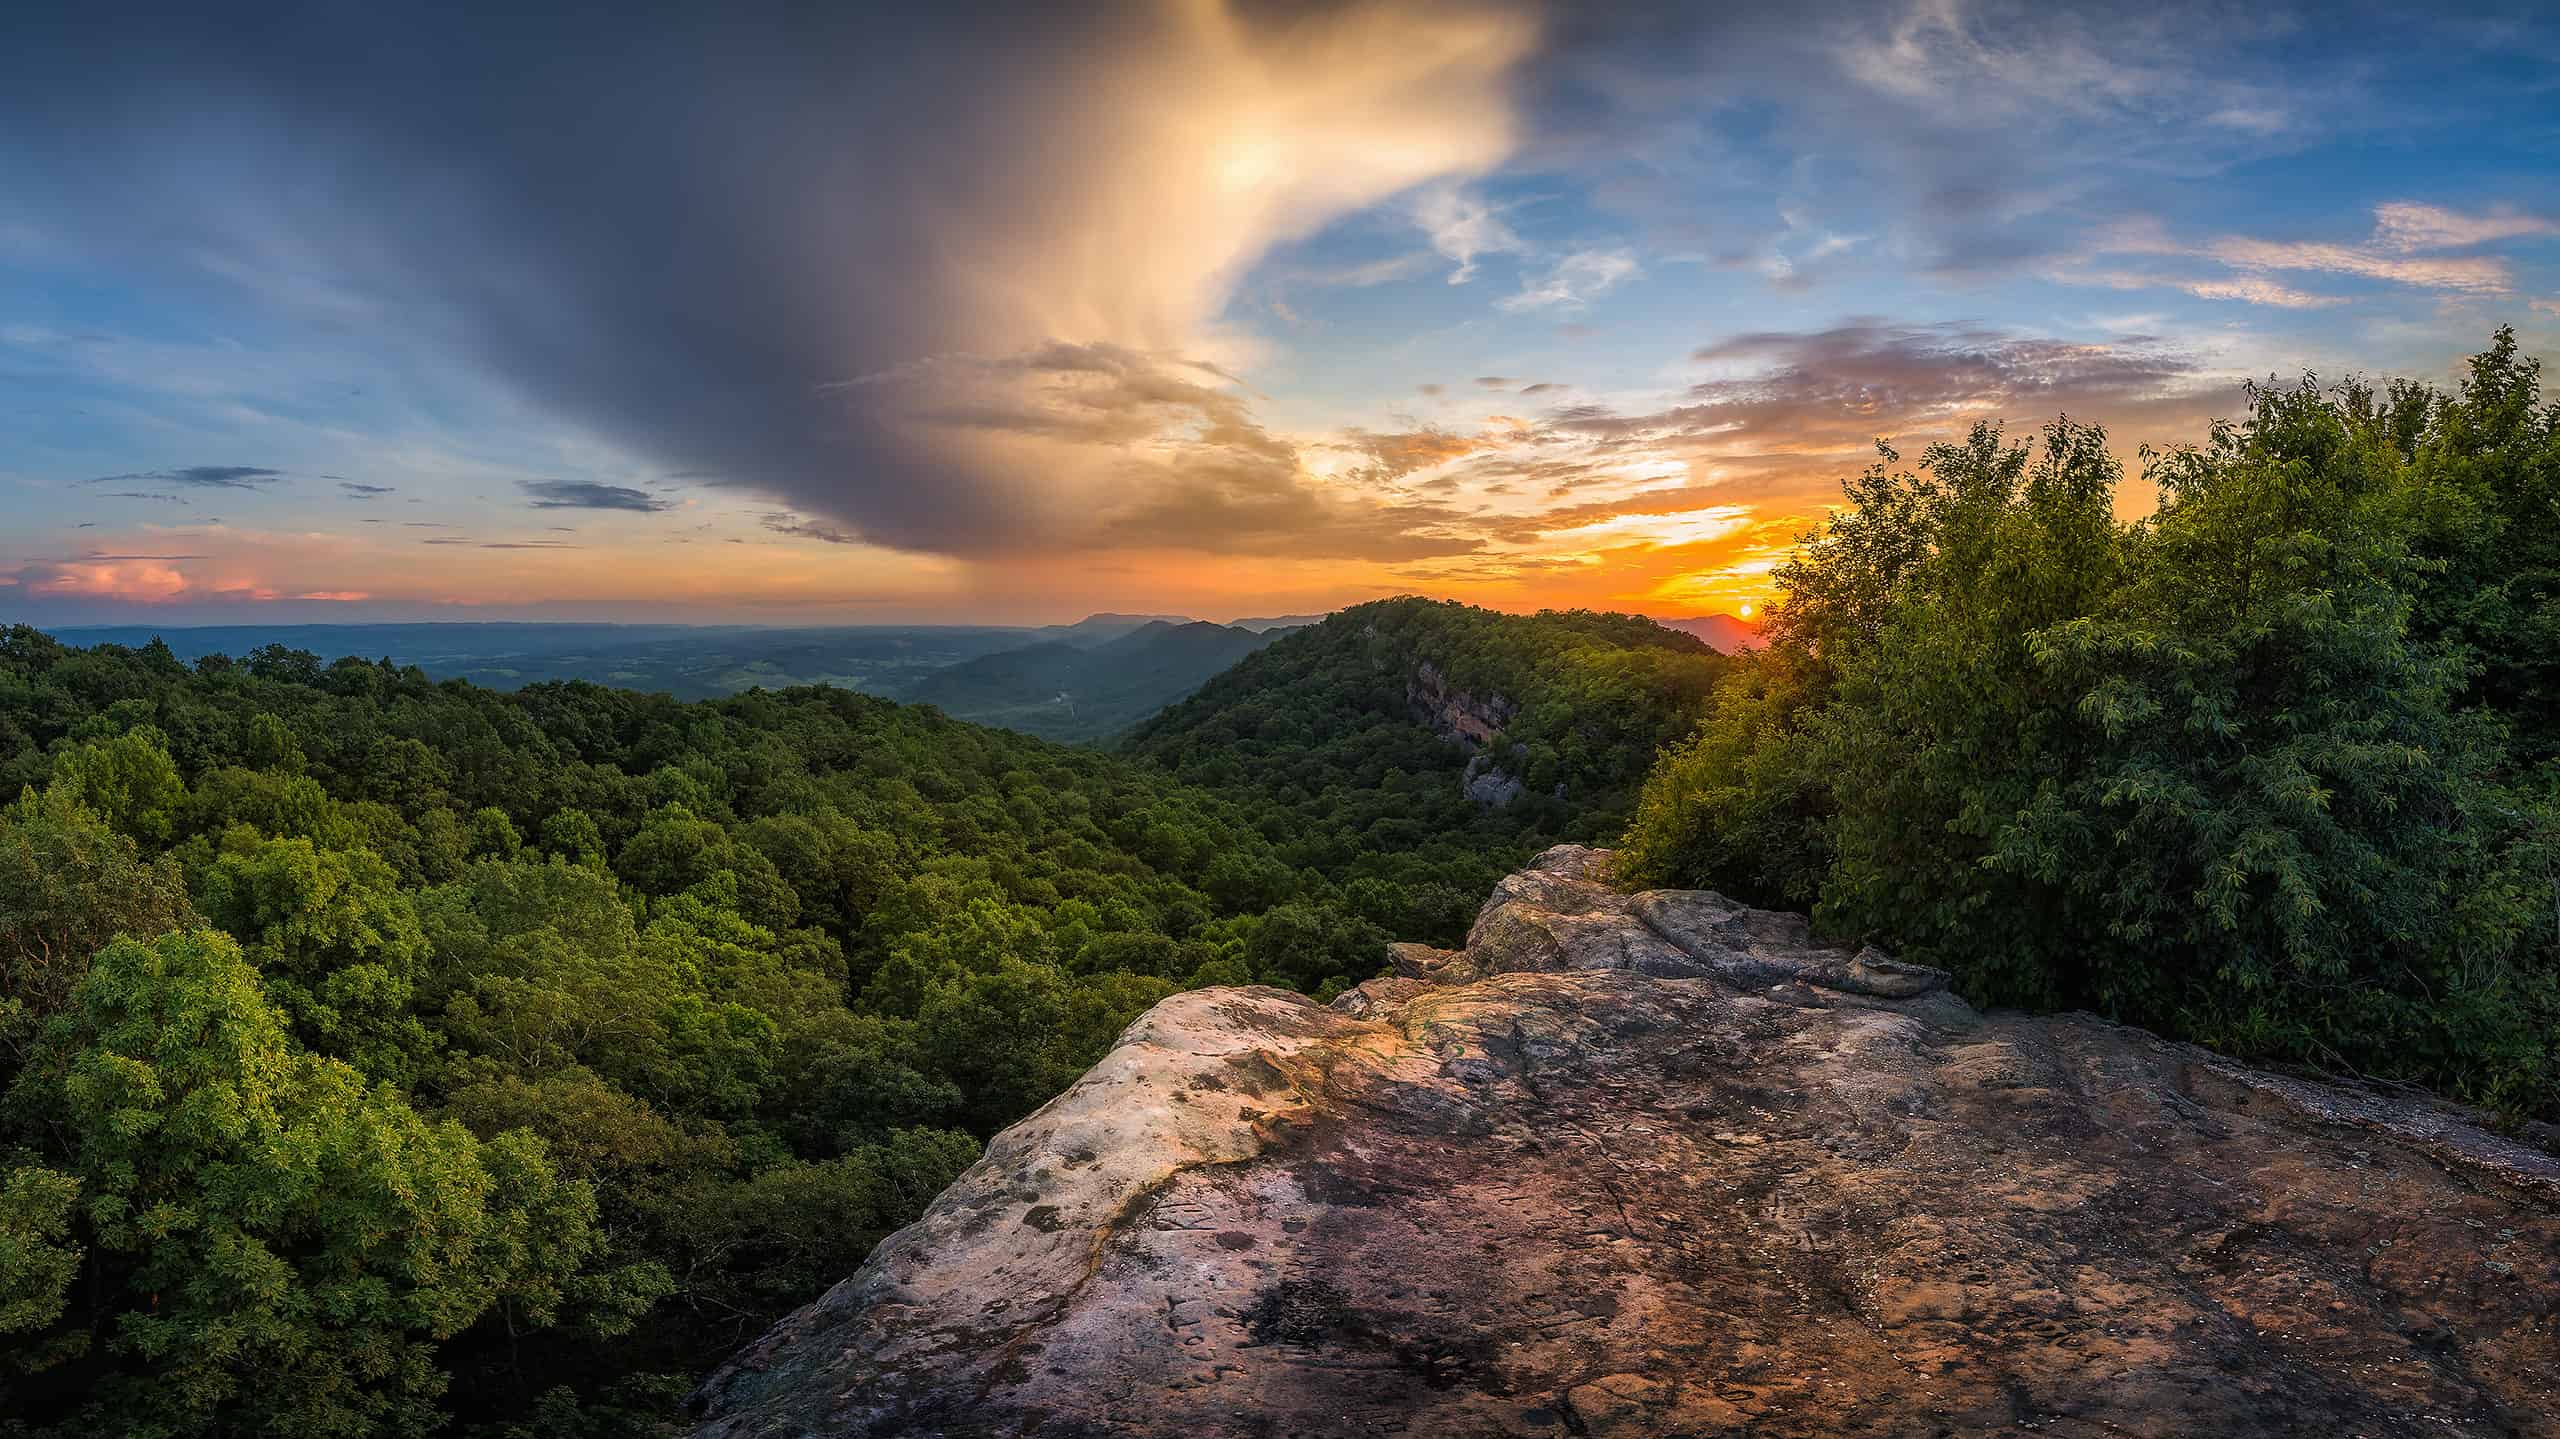 Appalachian Mountains, Kentucky and Virginia State Line, scenic sunset